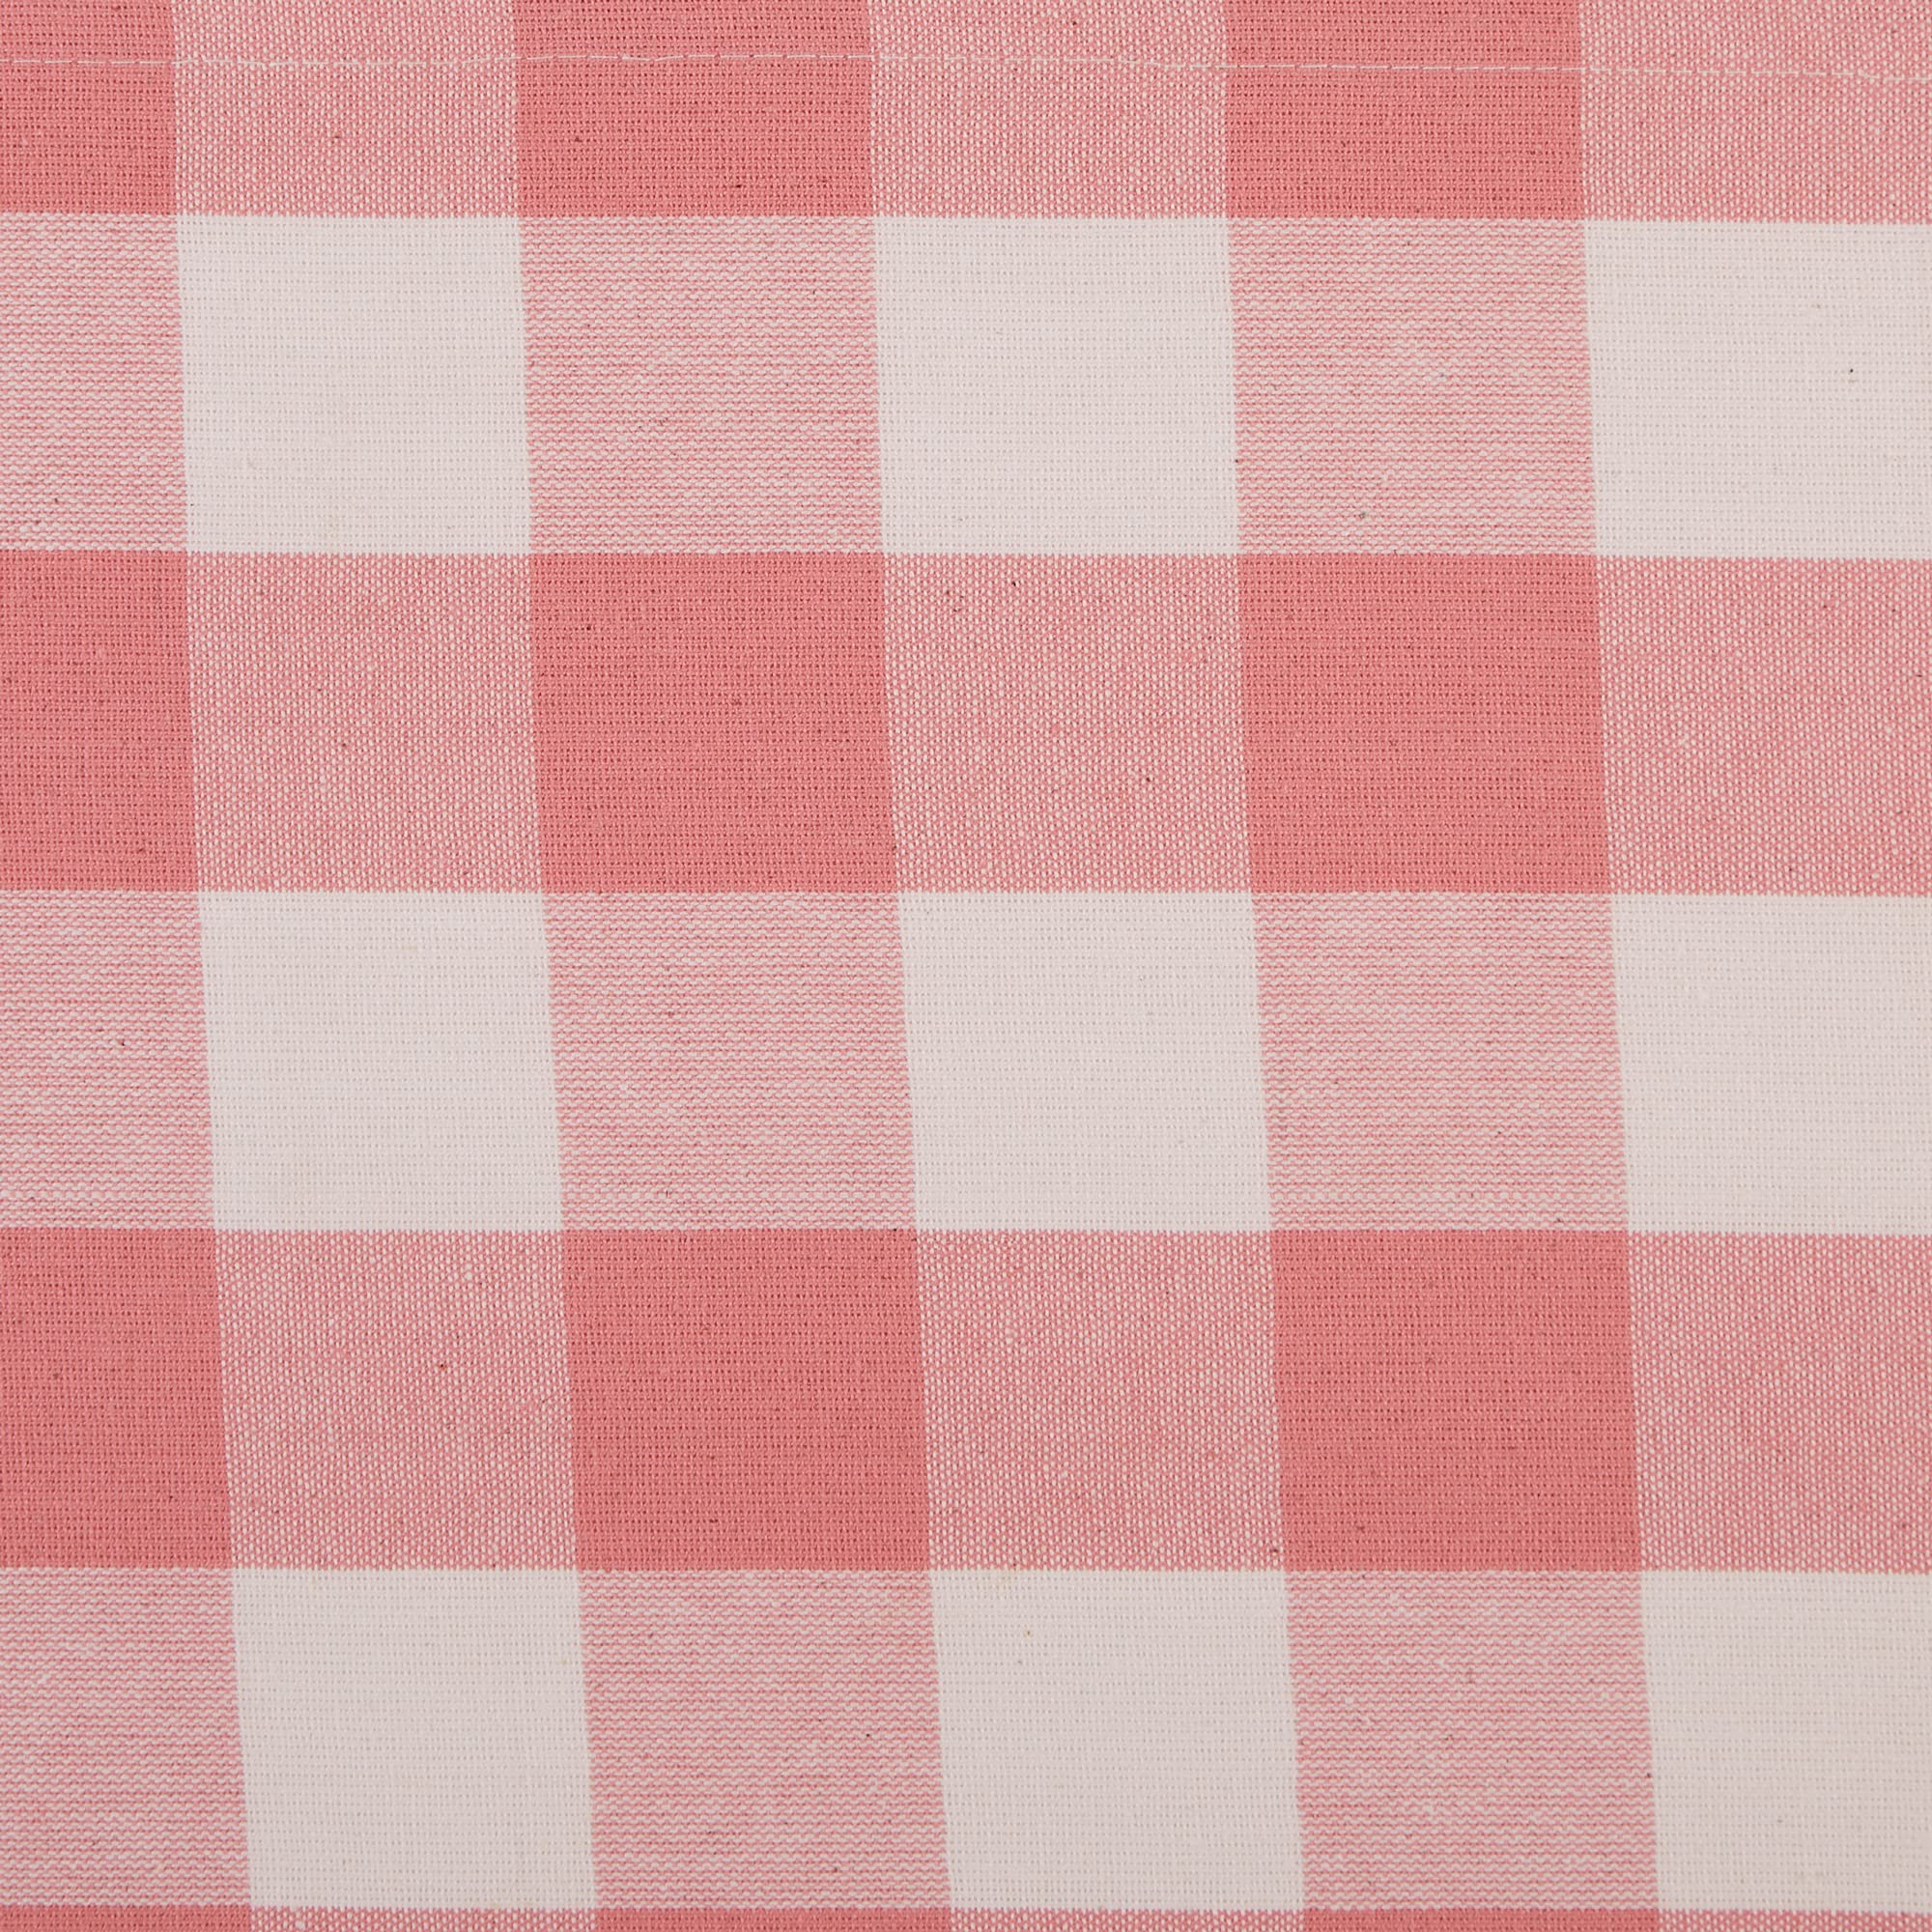 DII Buffalo Check Collection, Classic Farmhouse Table Runner, 14x72, Pink & White